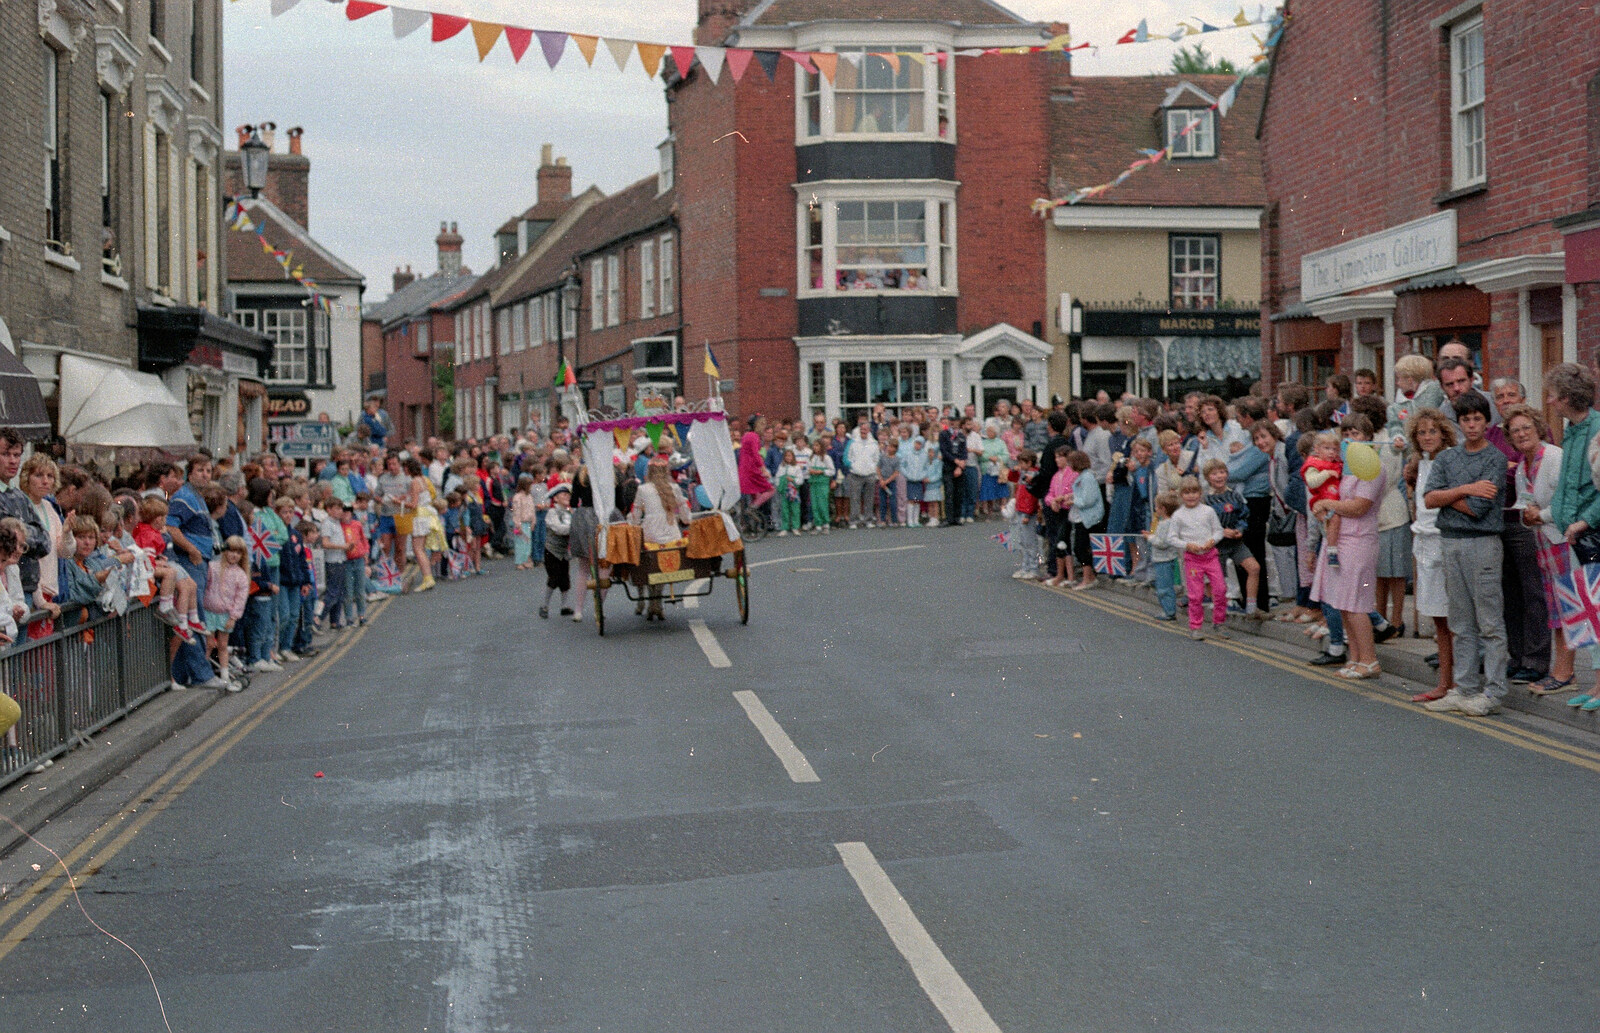 The procession heads up the High Street from The Lymington Carnival, Hampshire - 17th June 1985